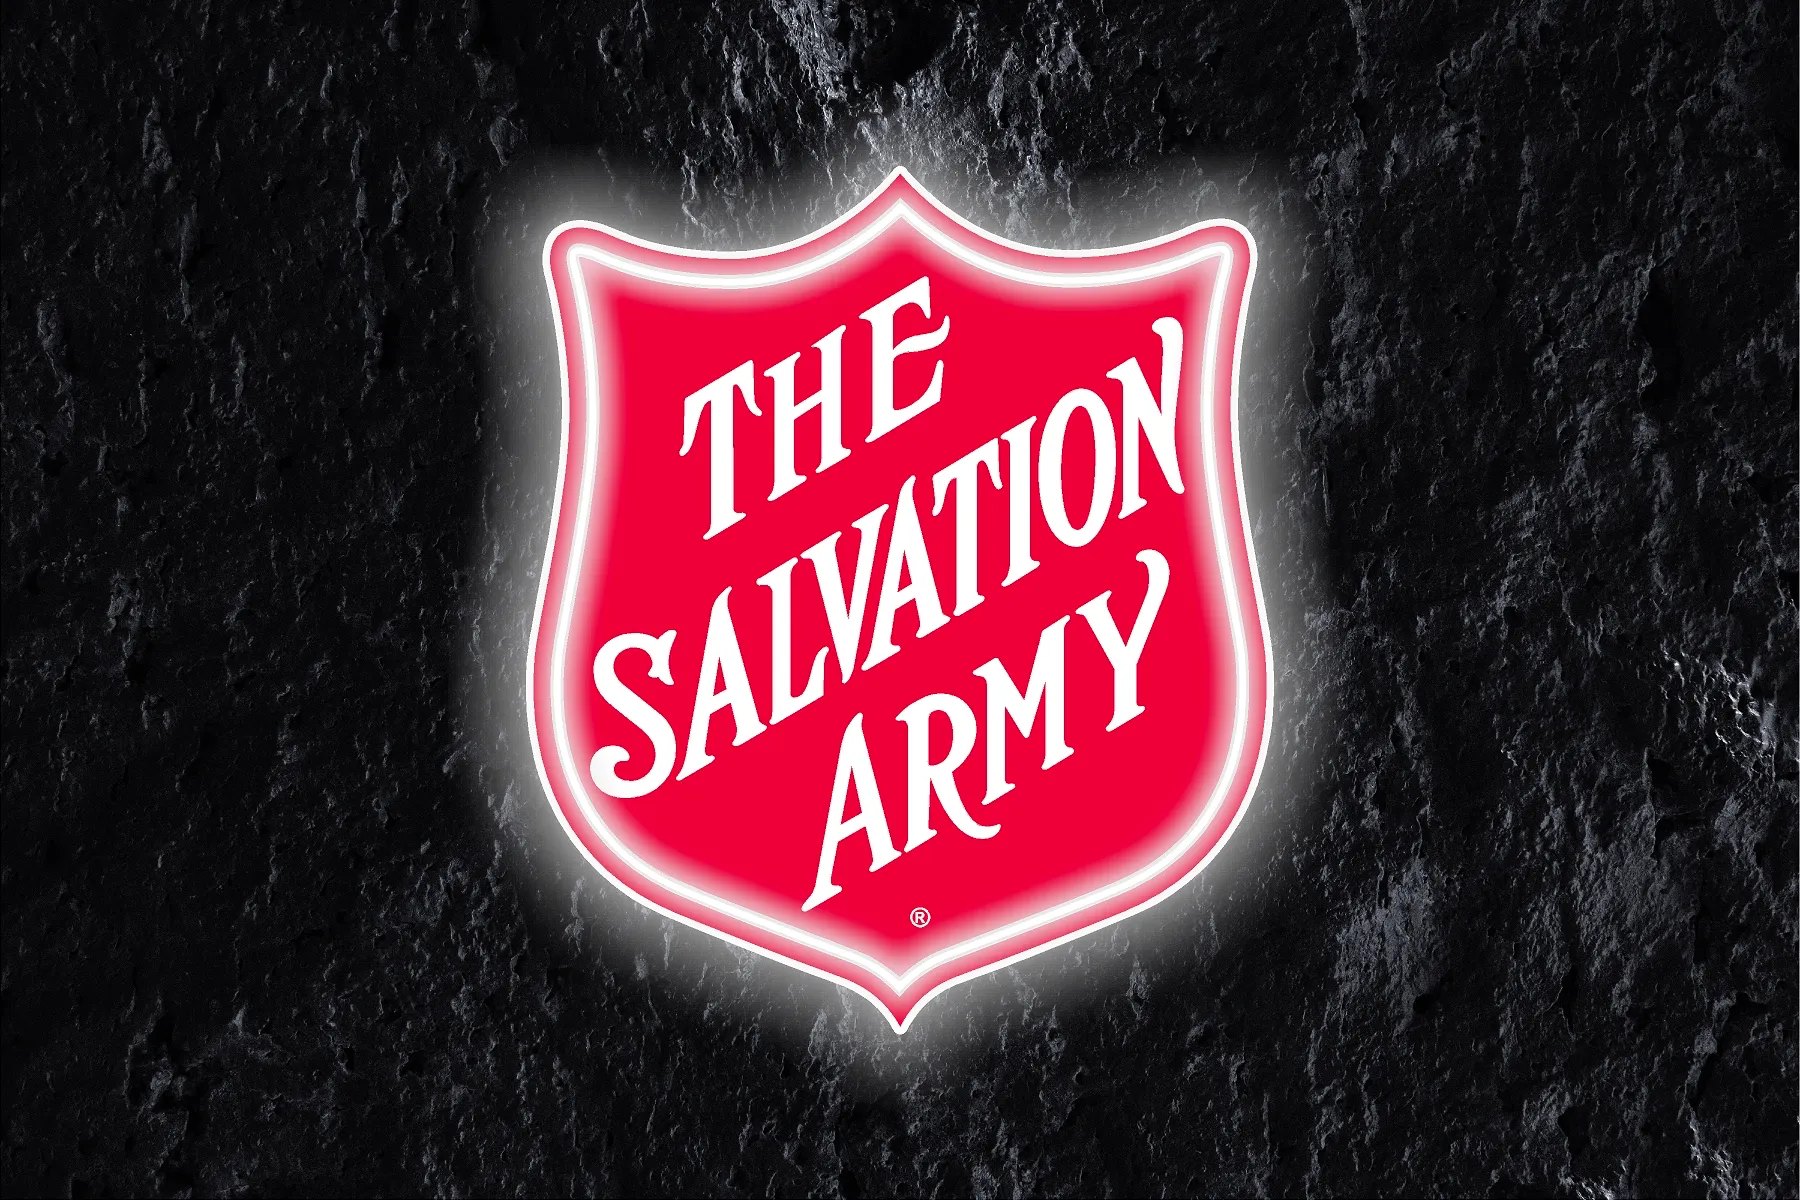 Medium Red Salvation Army Shield for wall mounting